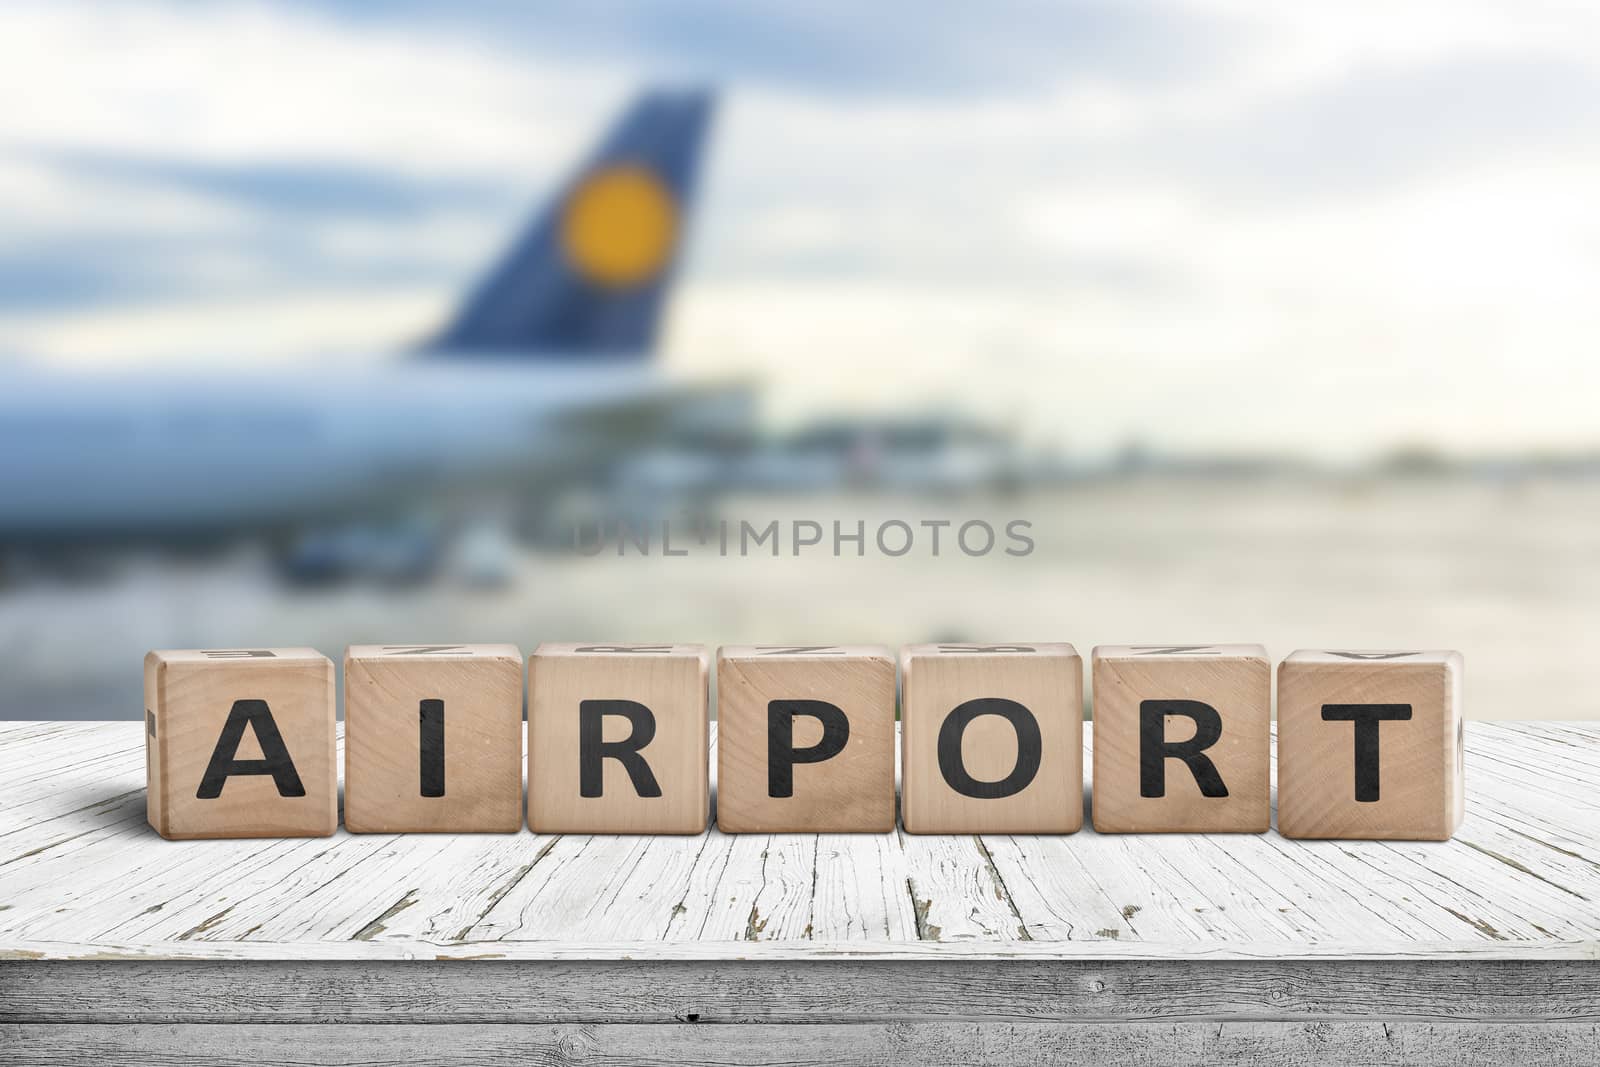 Airport word sign on a wooden surface with a plane in the background